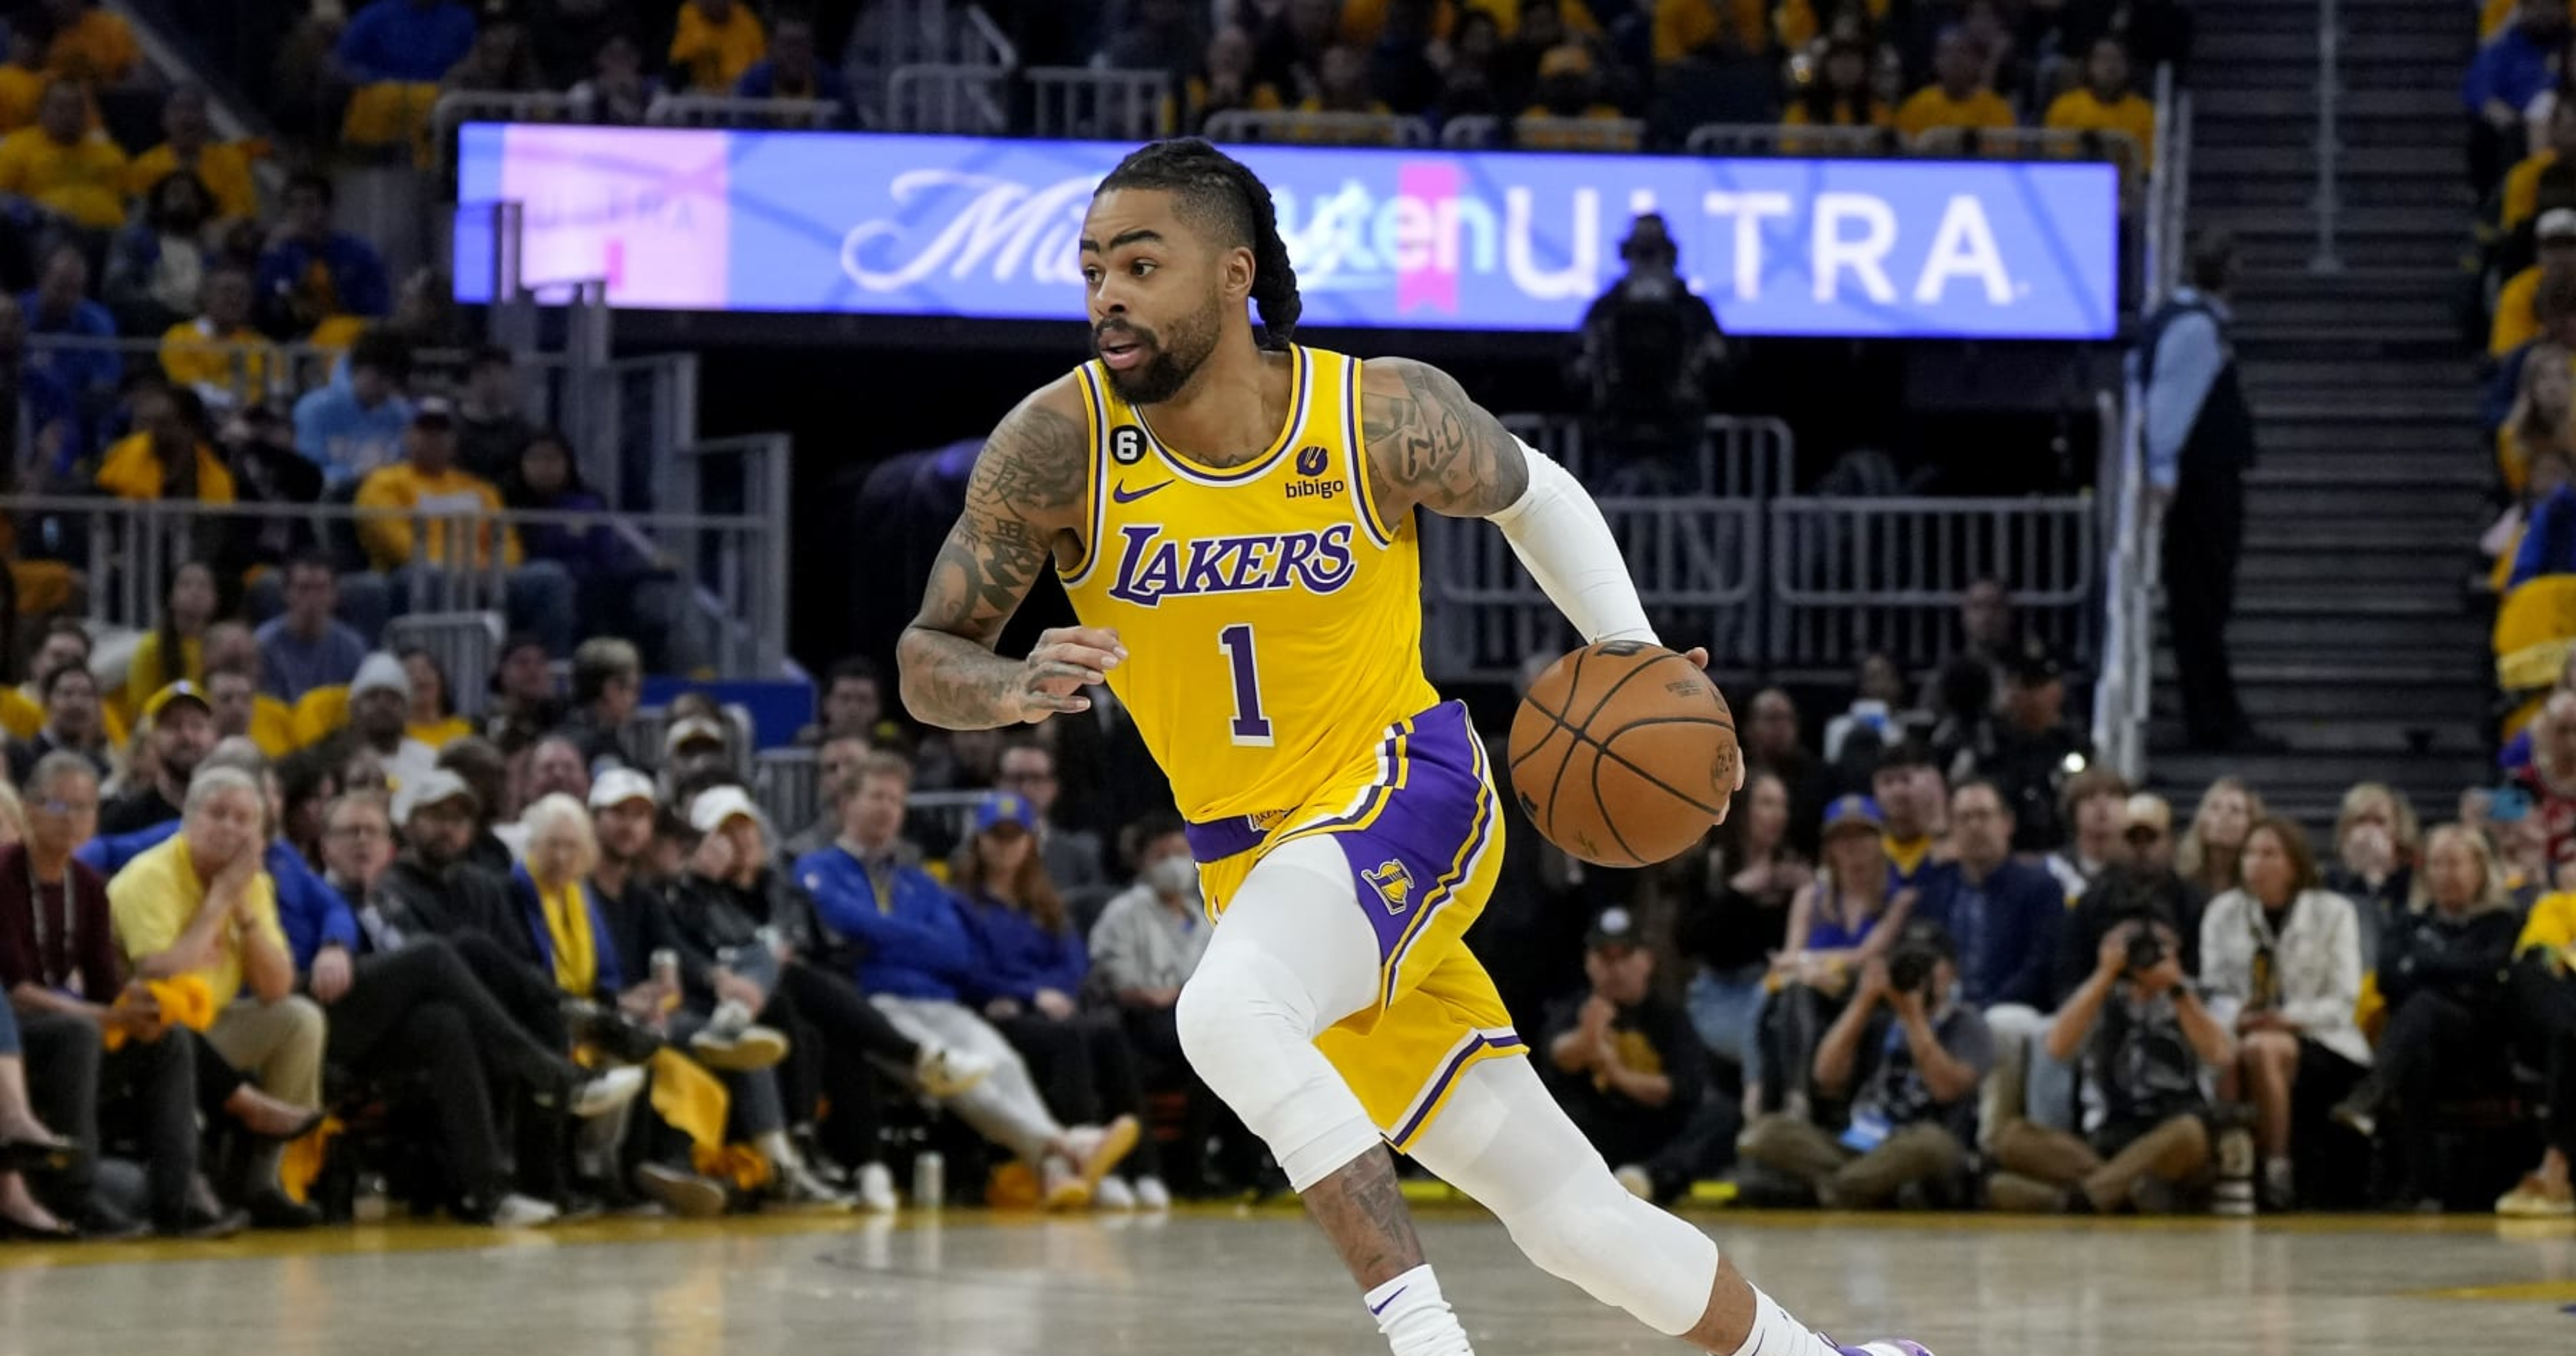 Lakers had a potential $100 million offer to D'Angelo Russell on the table  in free agency, per report 